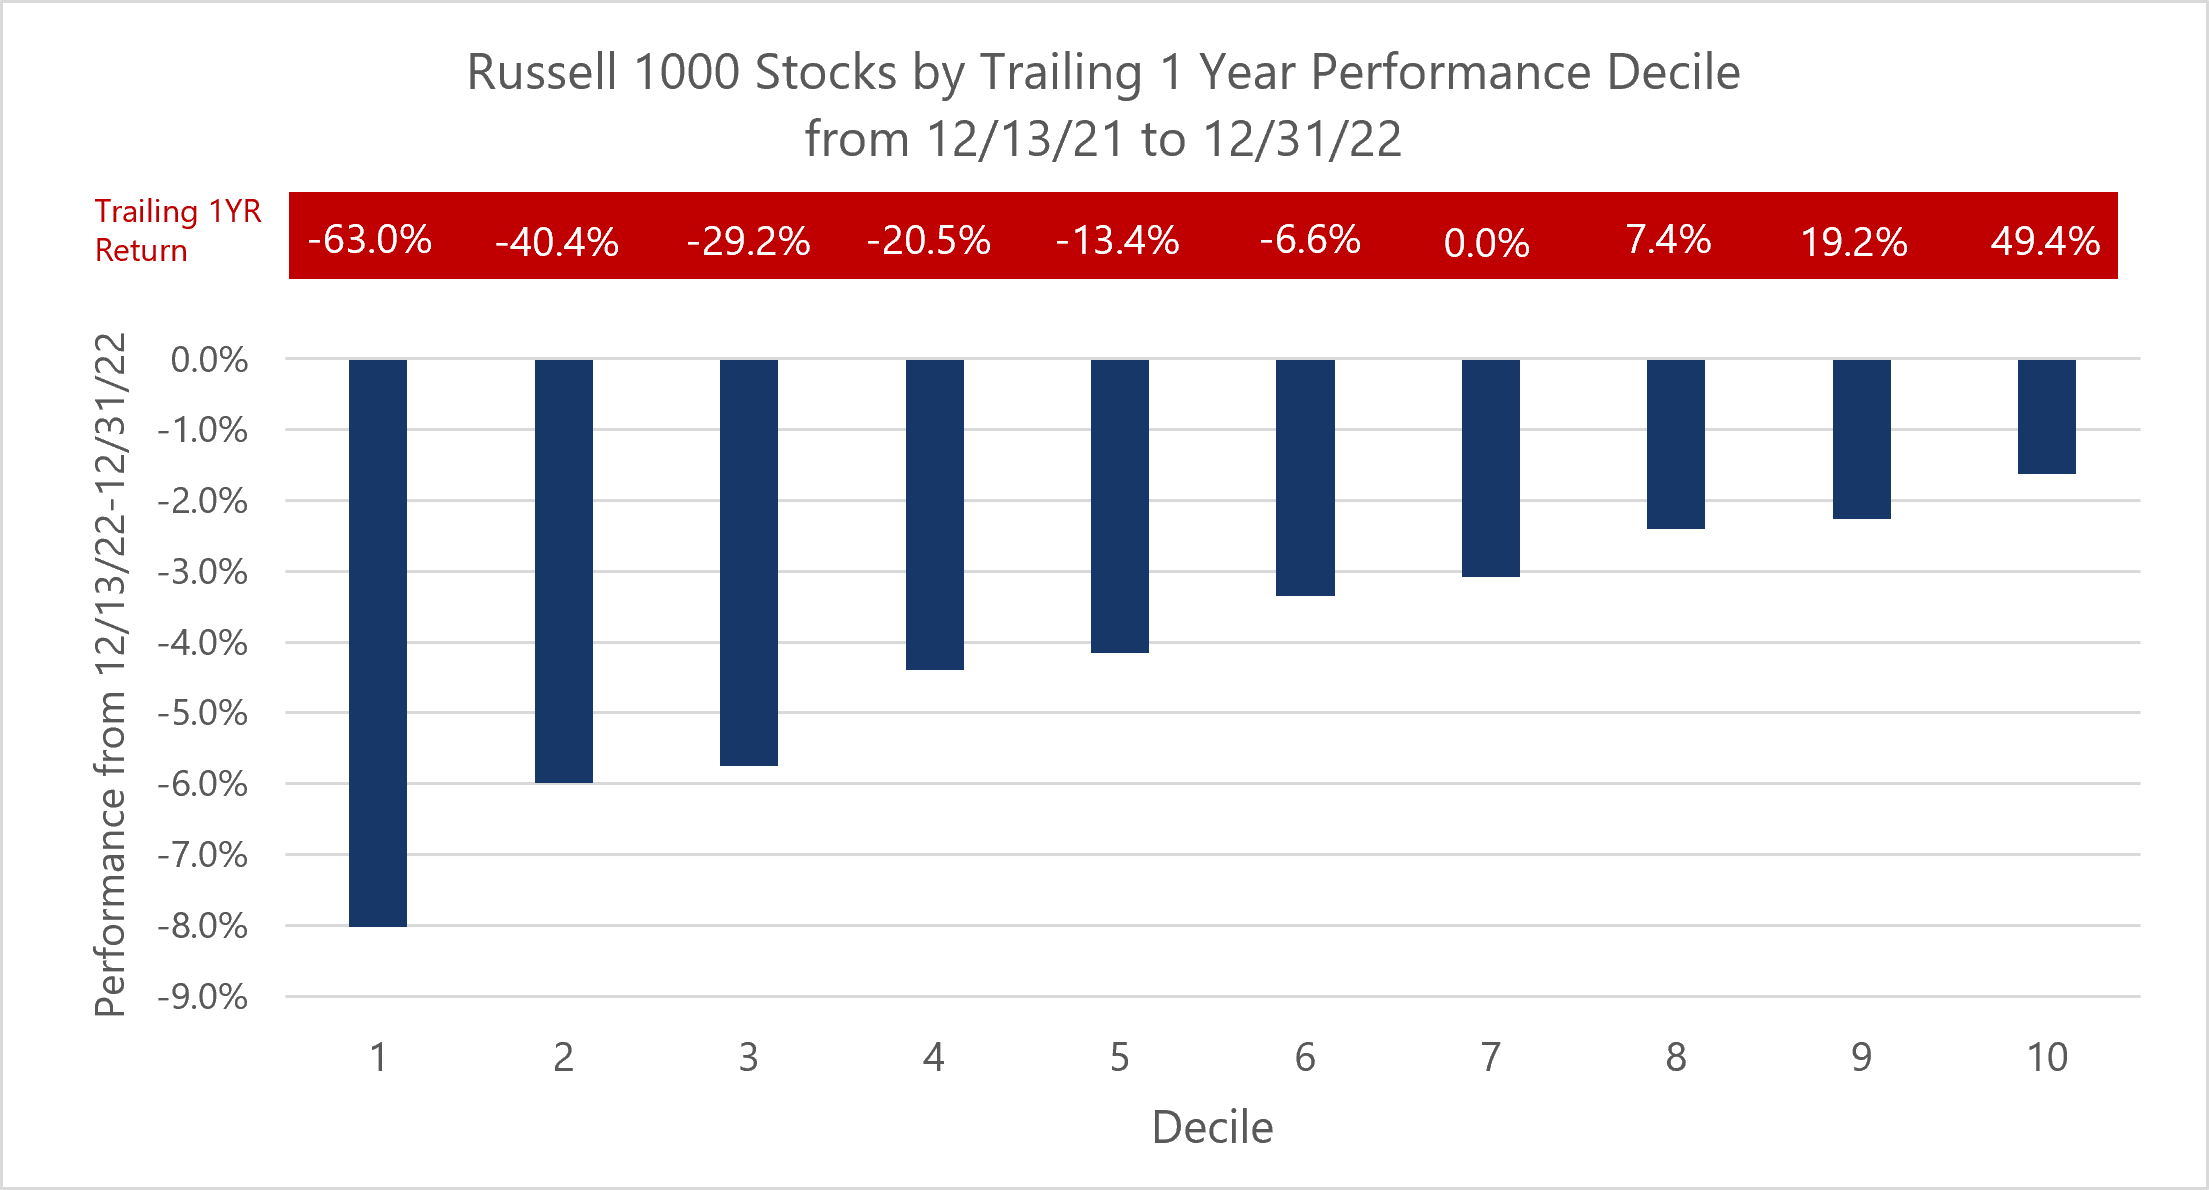 Russell 1000 Trailing 1 year performance and decile 2